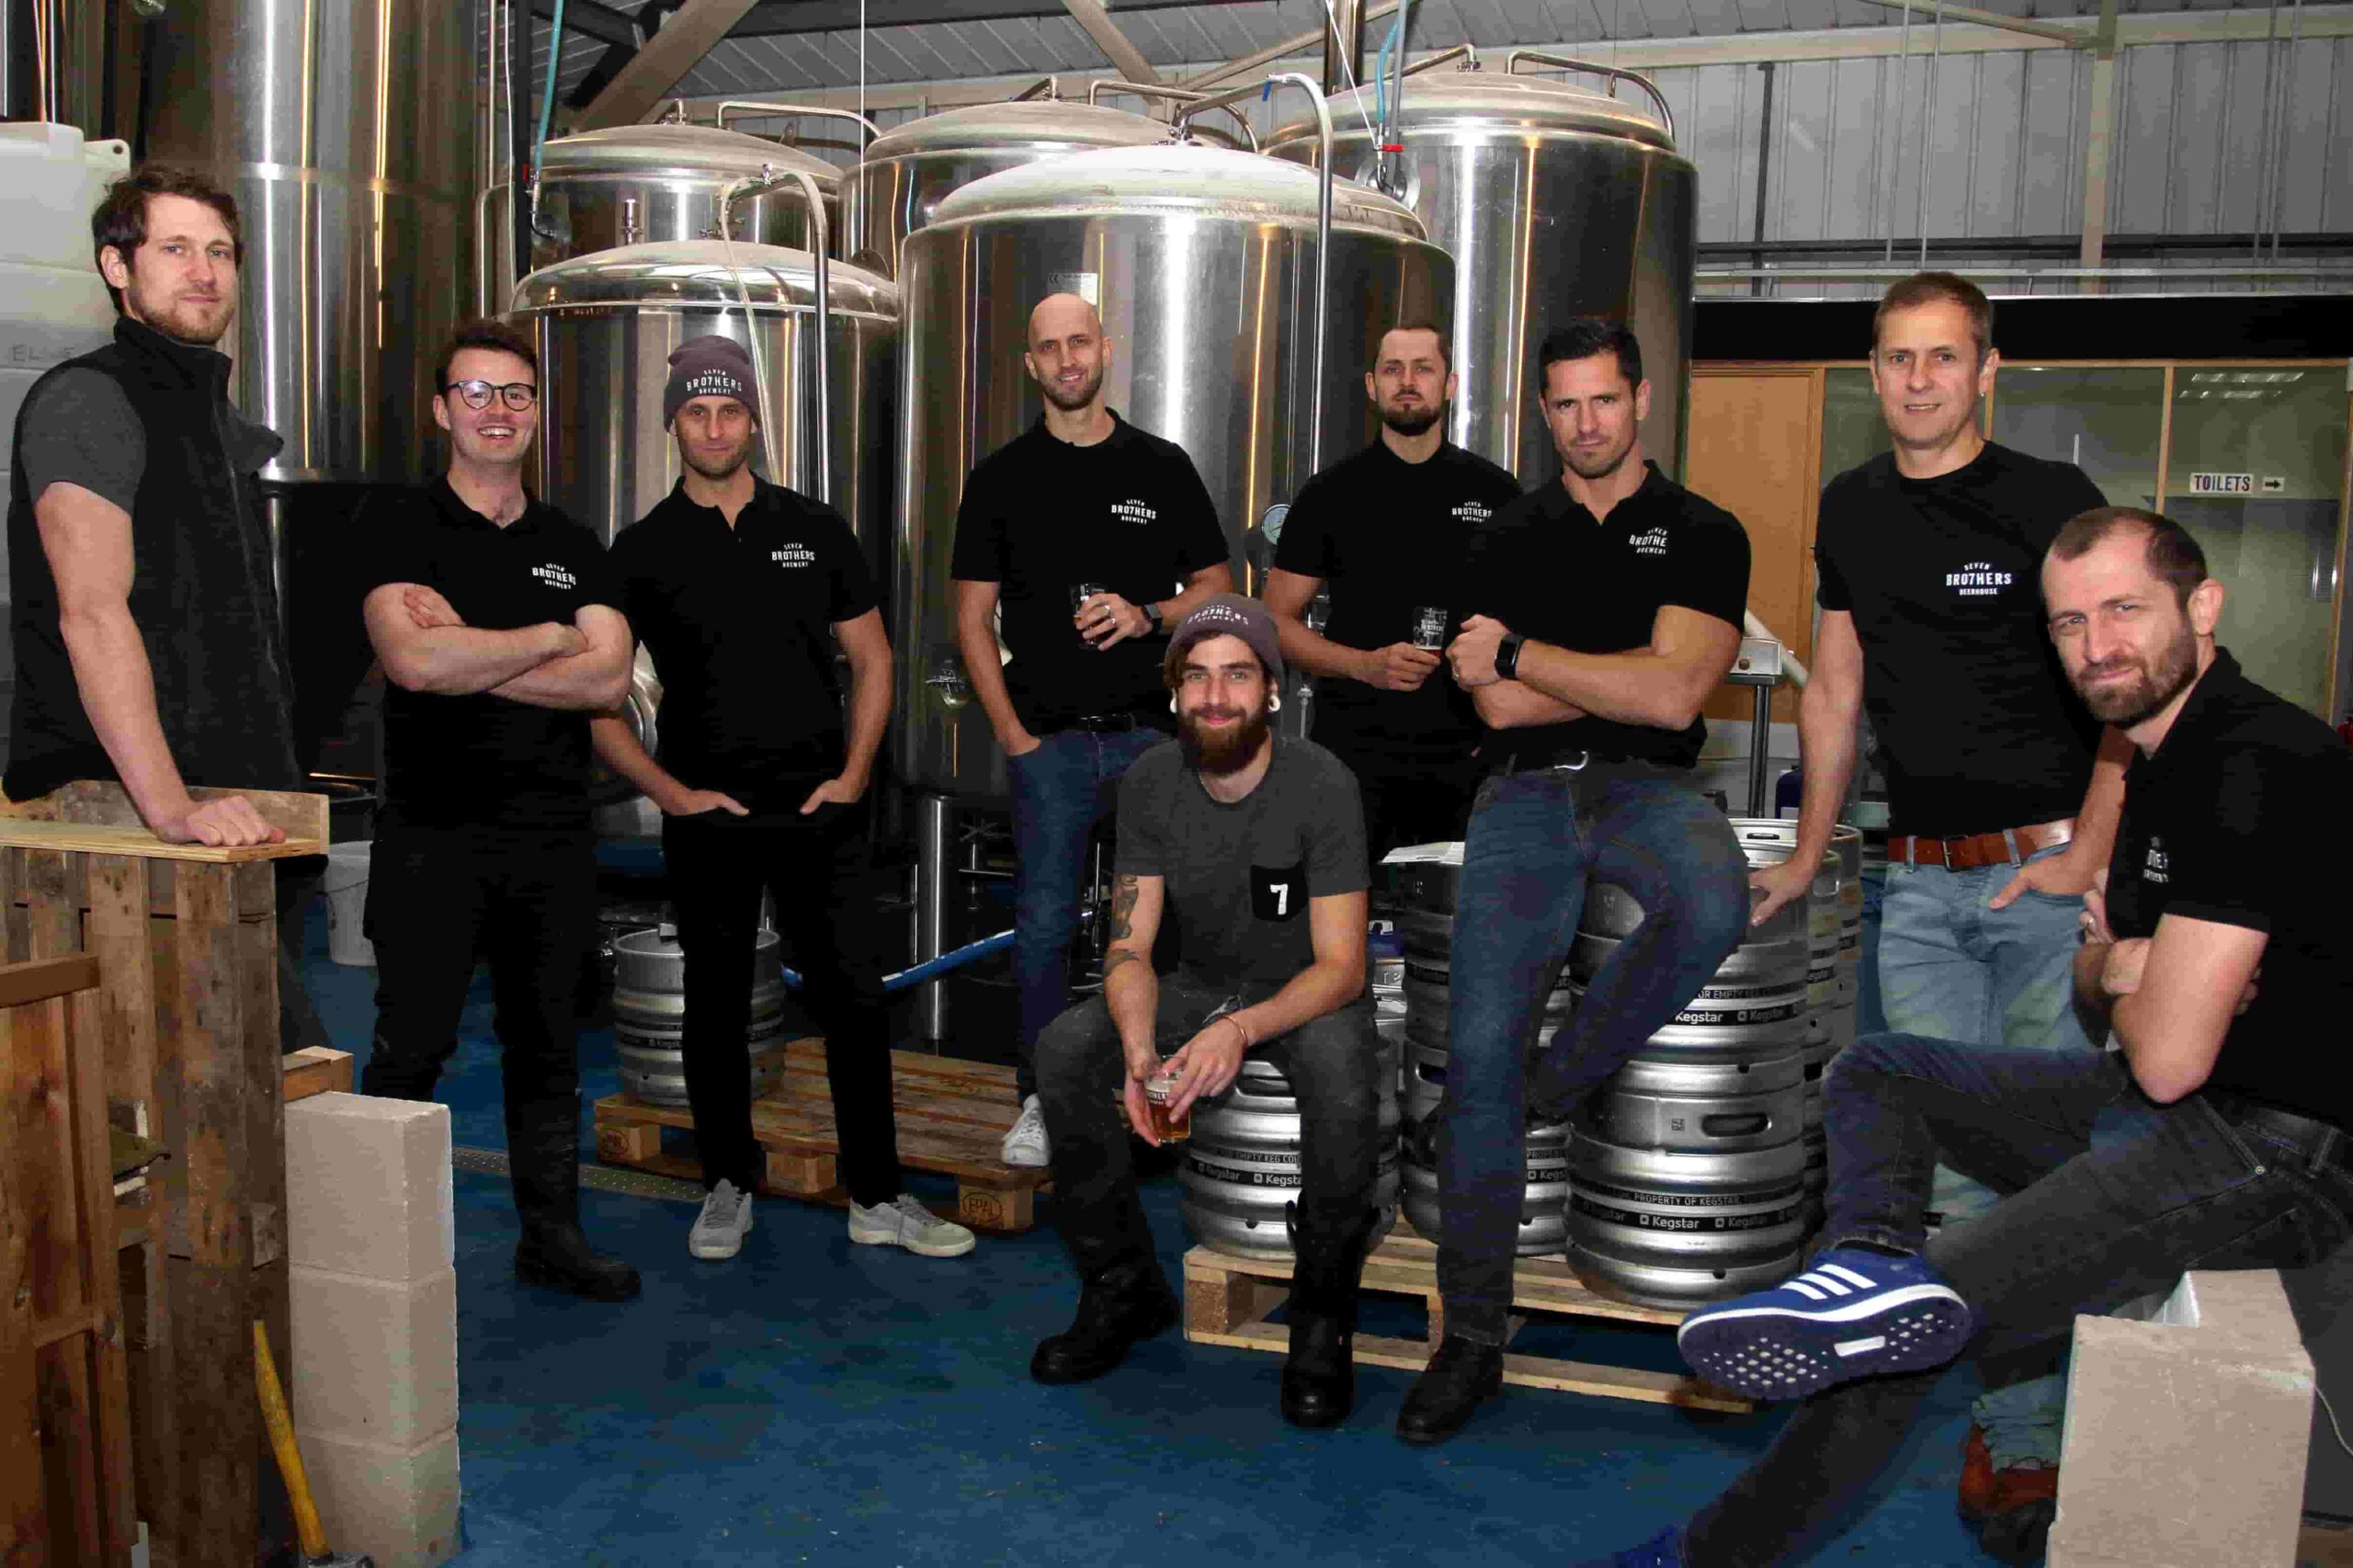 All seven of the brothers behind Seven Brothers Brewery in Manchester